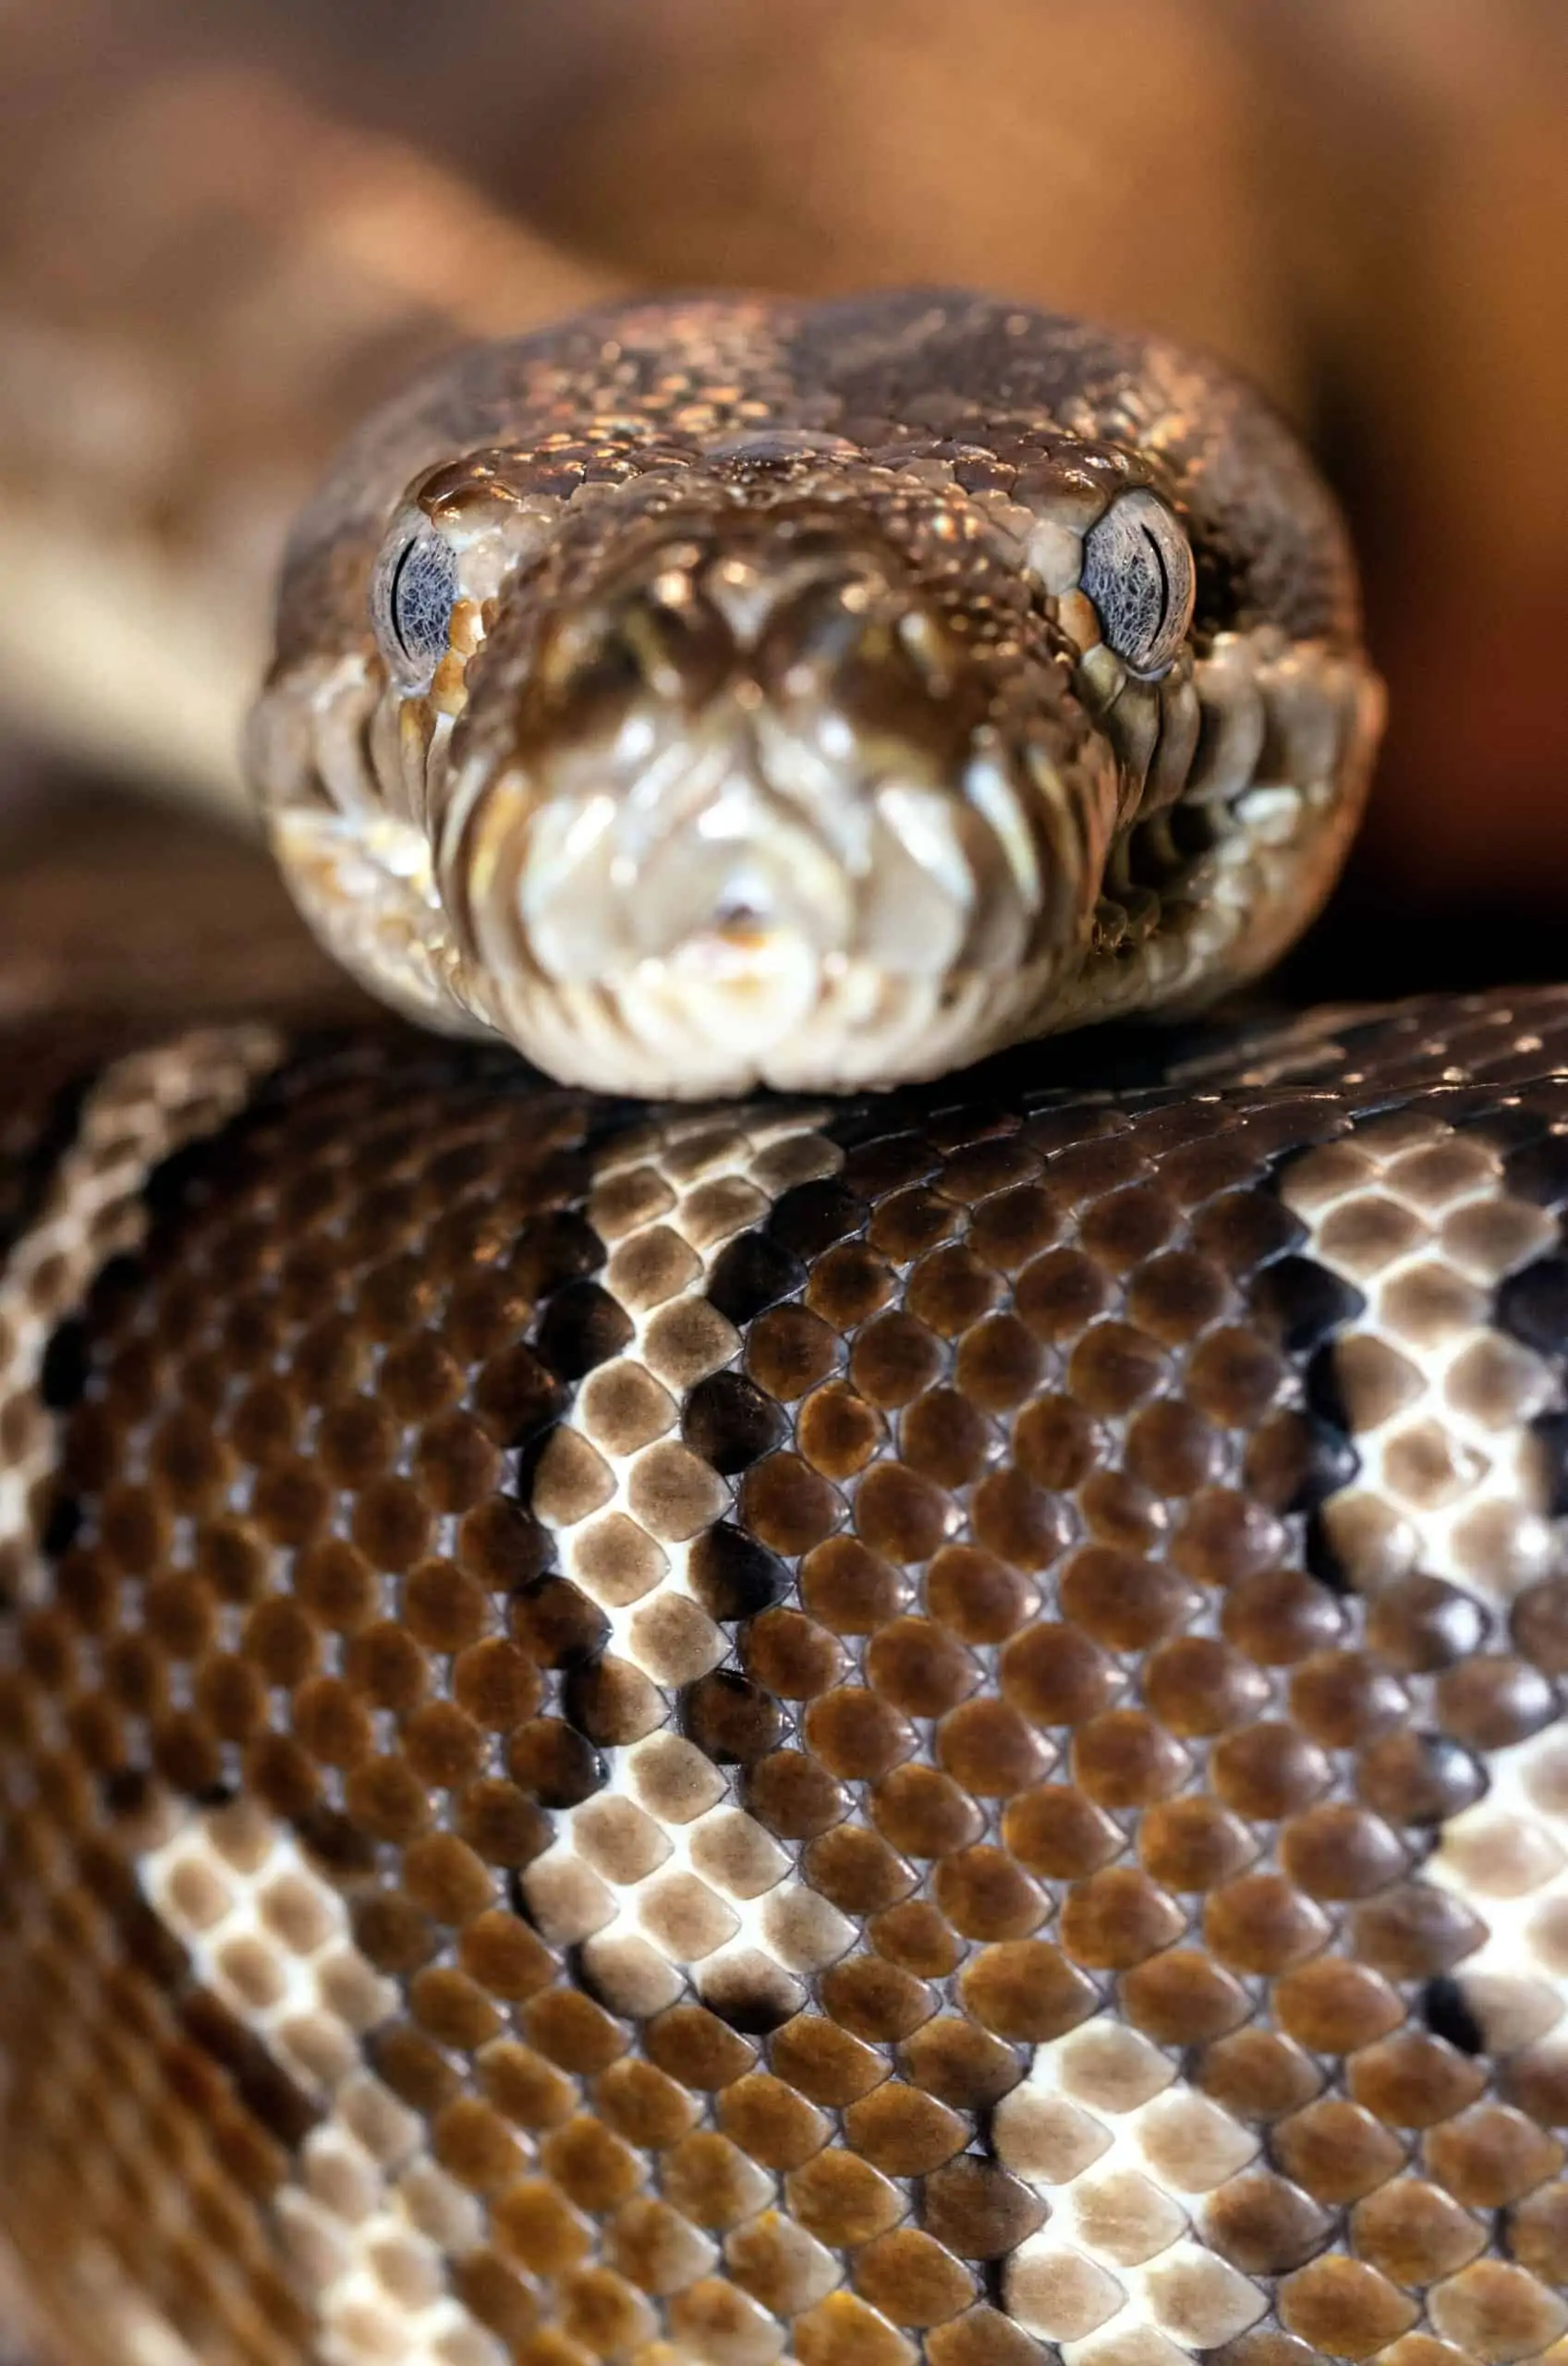 African Rock Pythons - Are They Good Pets